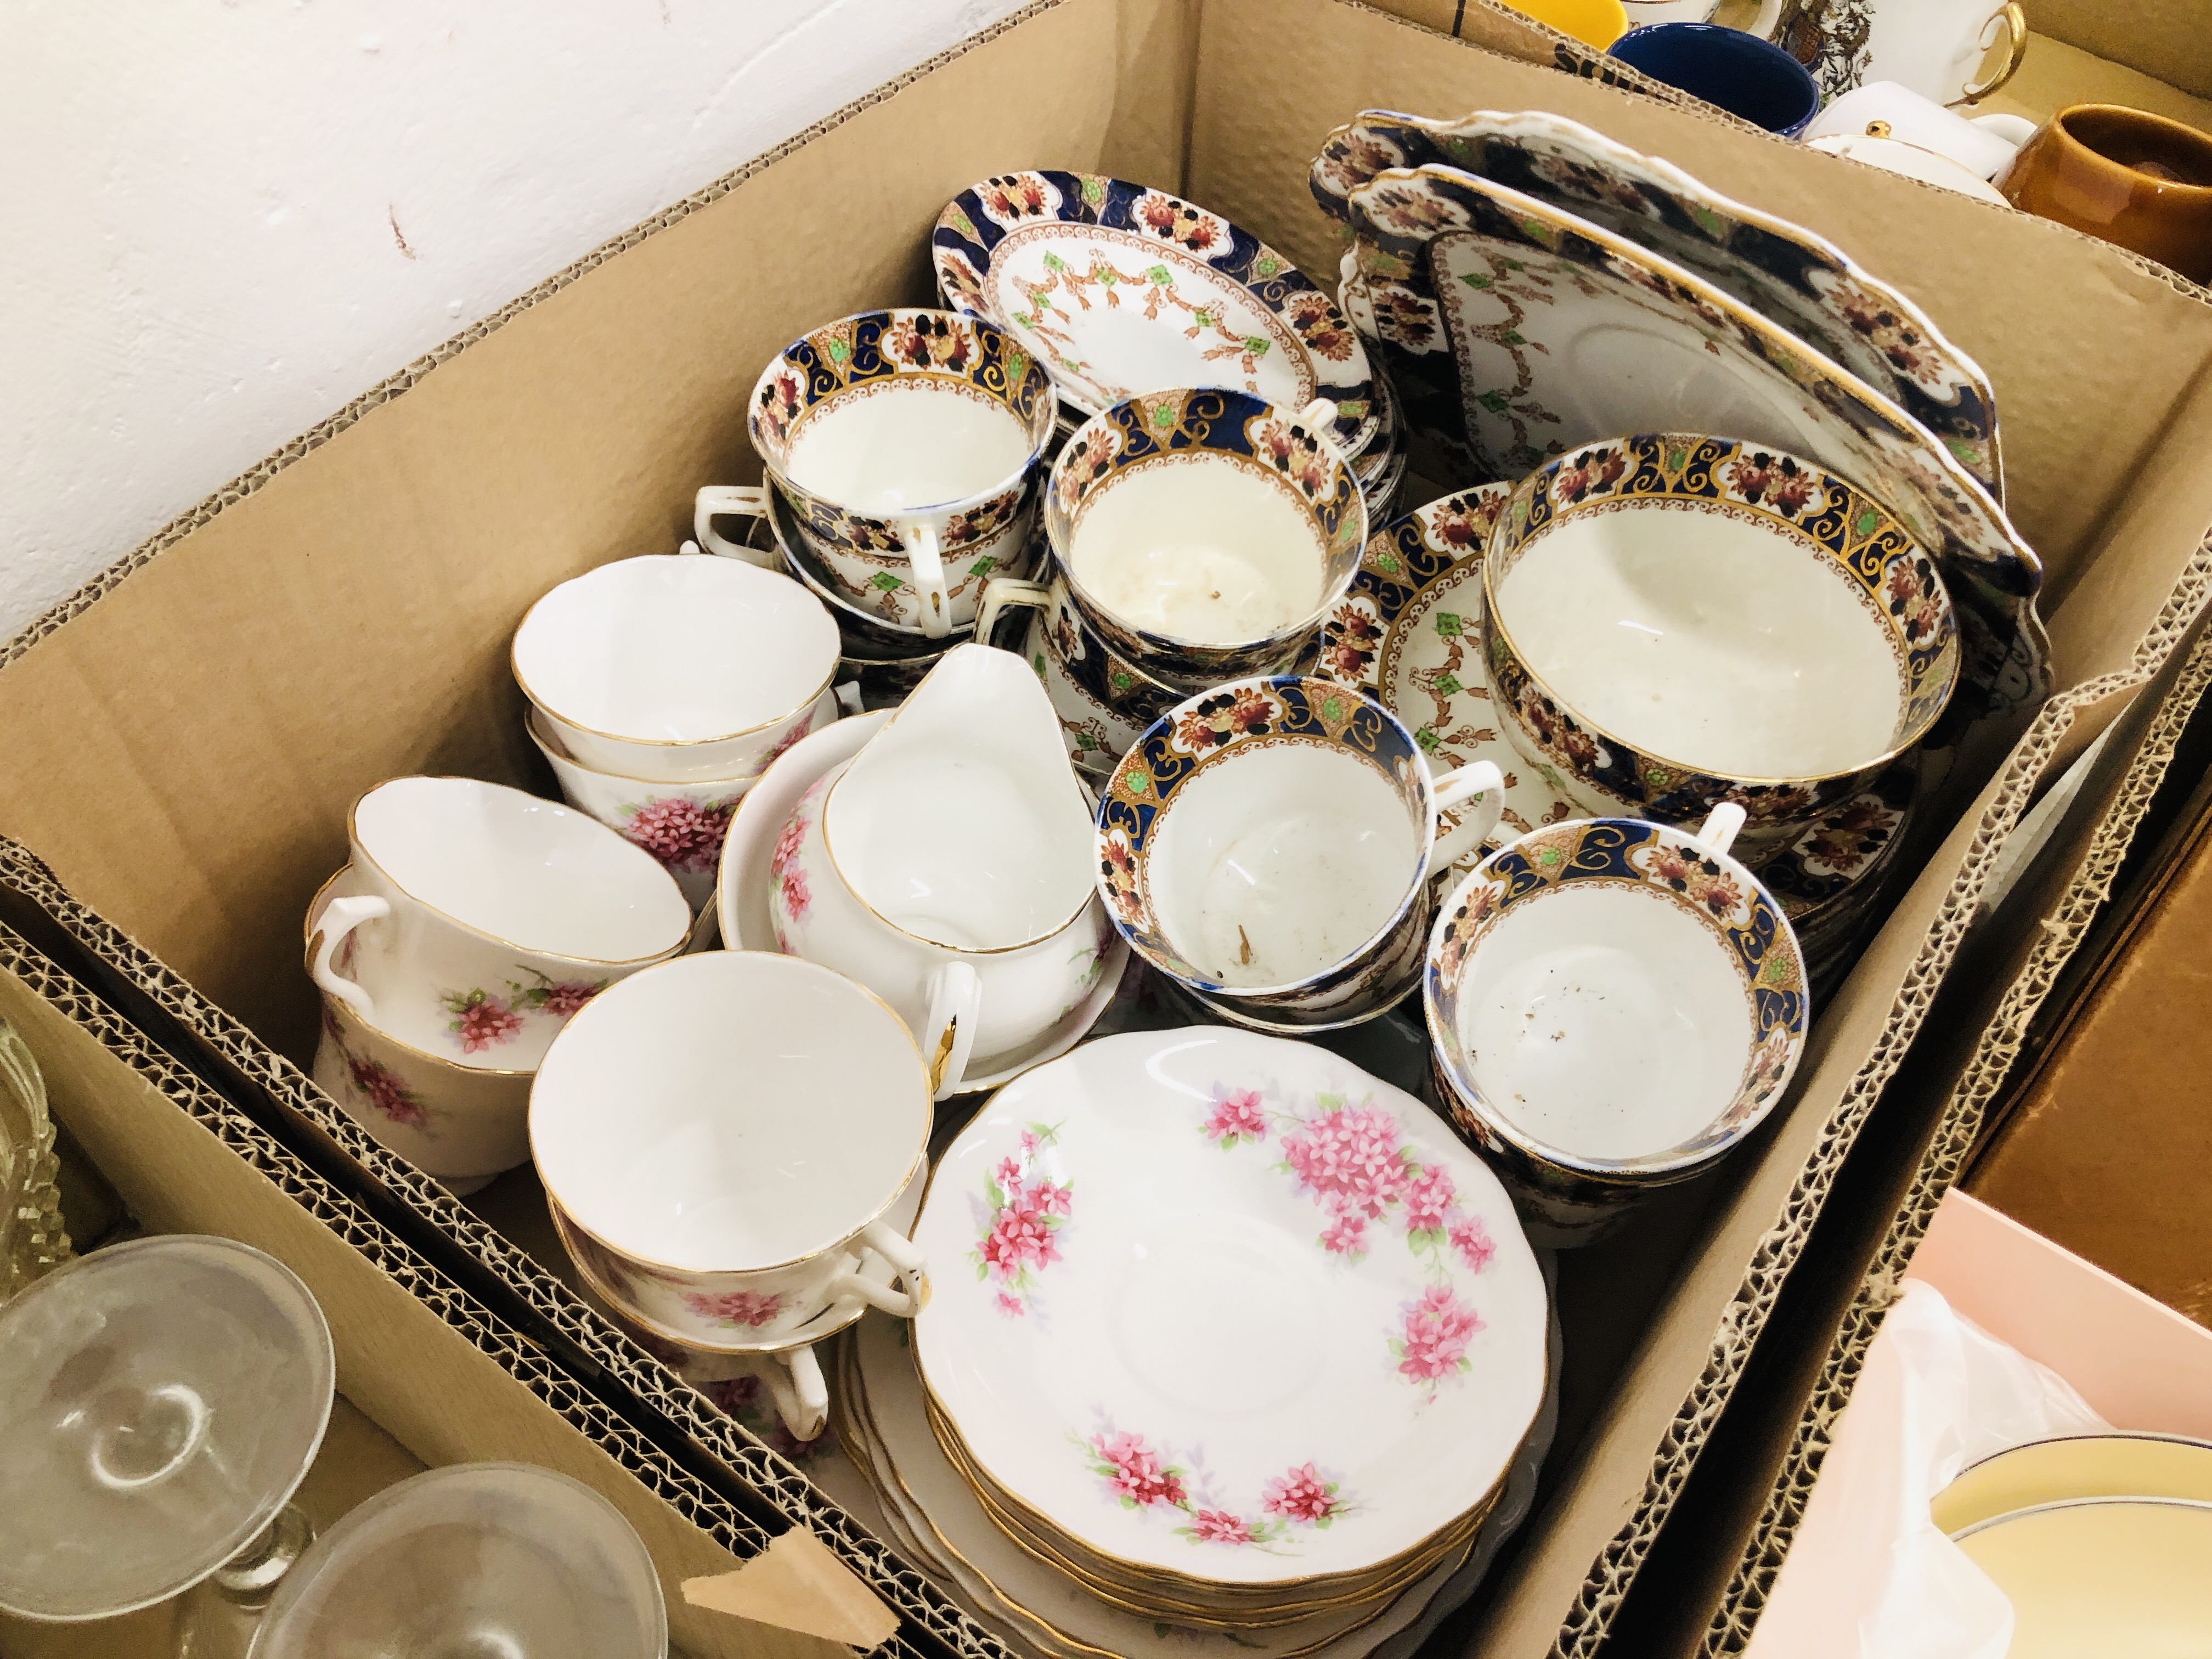 5 X BOXES OF ASSORTED HOUSEHOLD SUNDRIES CHINA AND GLASS WARE, MUGS AND WADE WHIMSIES, PICTURES ETC. - Image 6 of 10